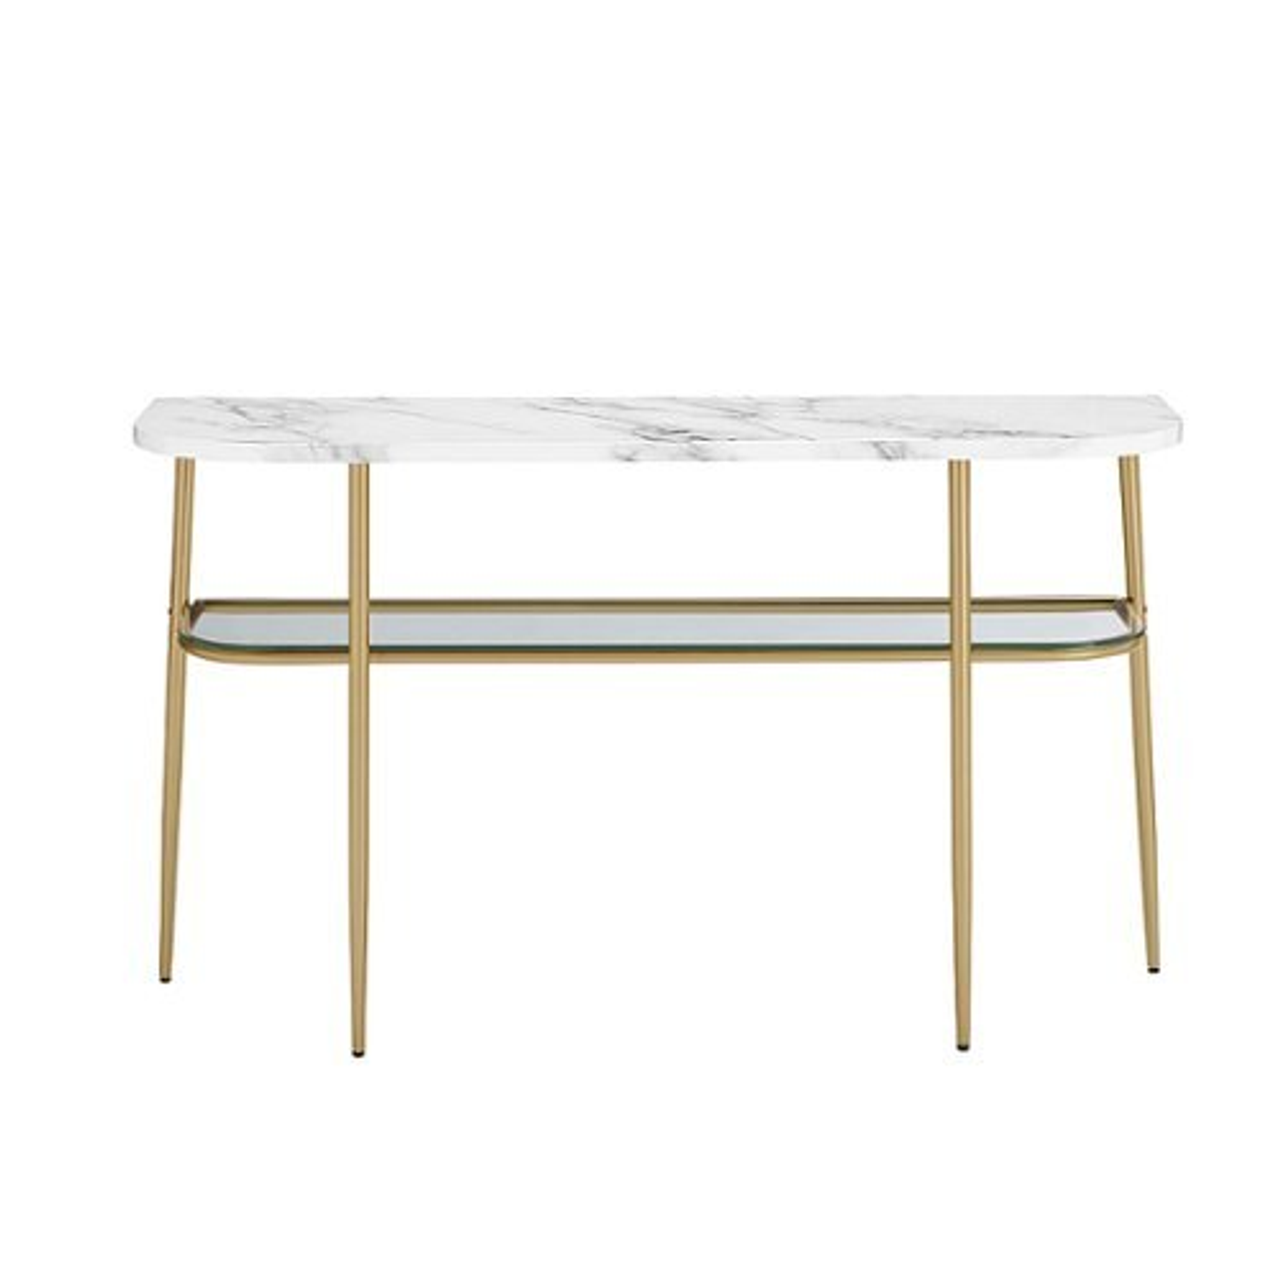 Walker Edison - Glam Mixed-Material Entry Table - Calacatta Marble